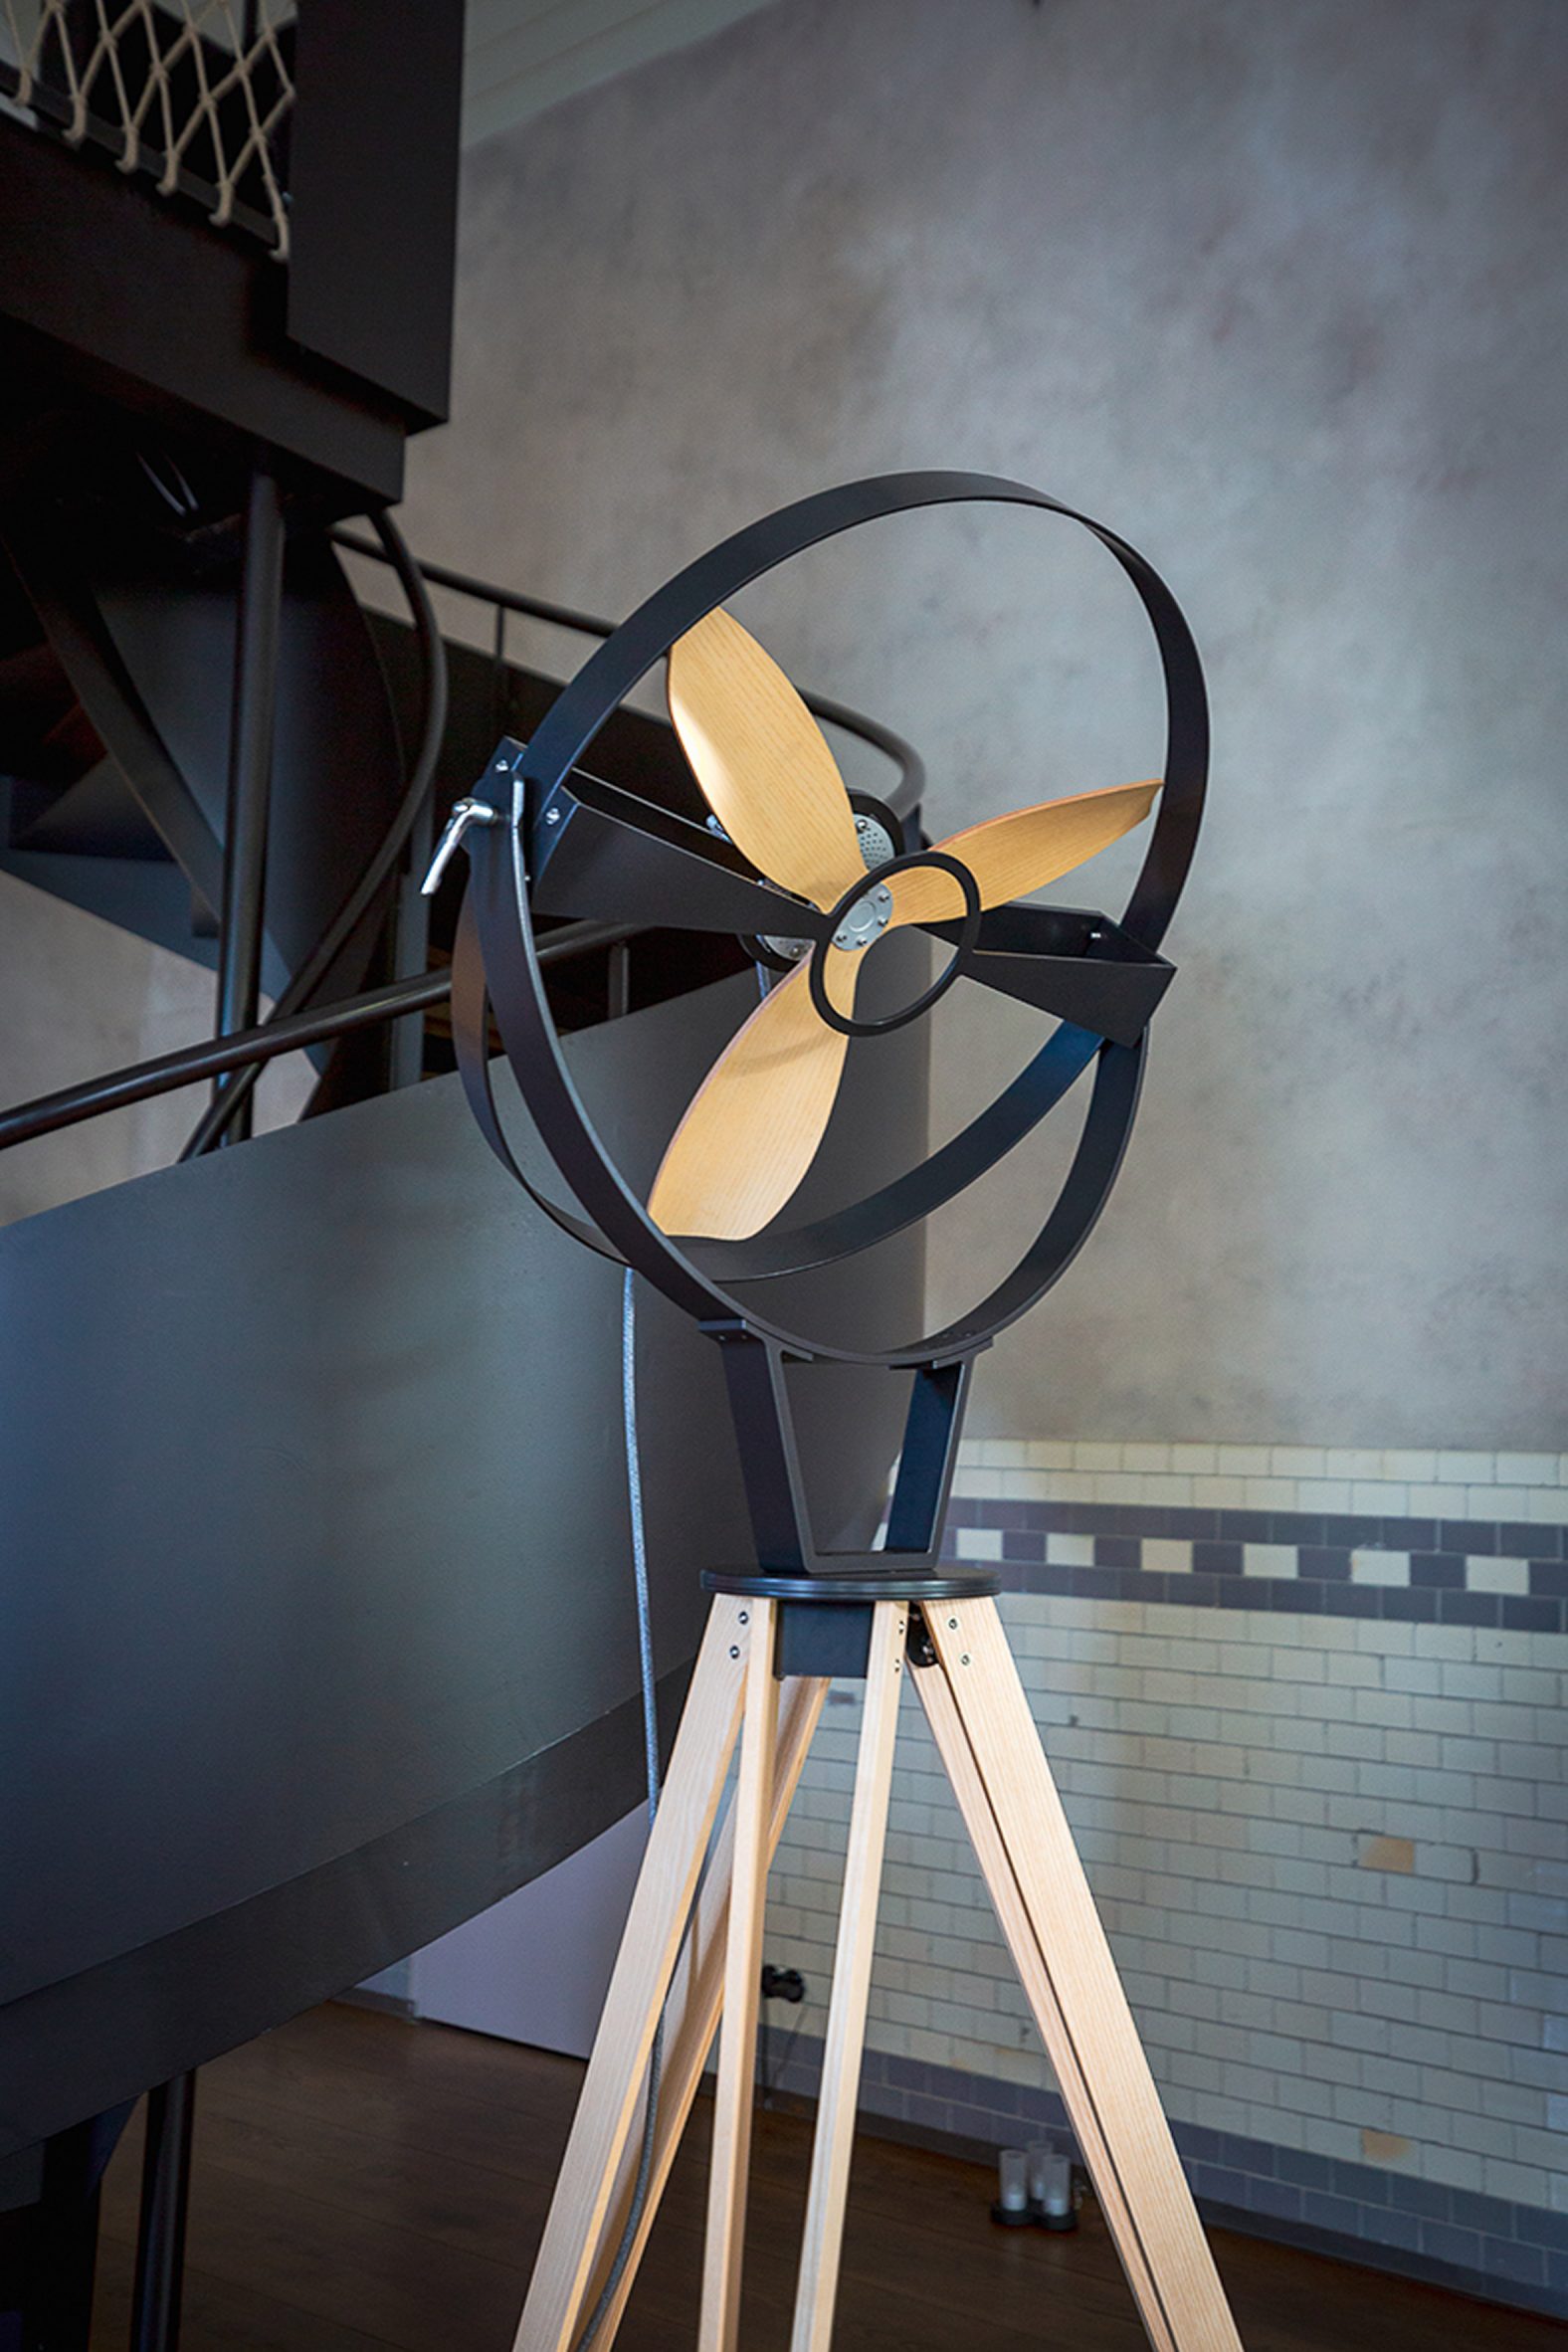 Photograph showing timber and black pedestal fan